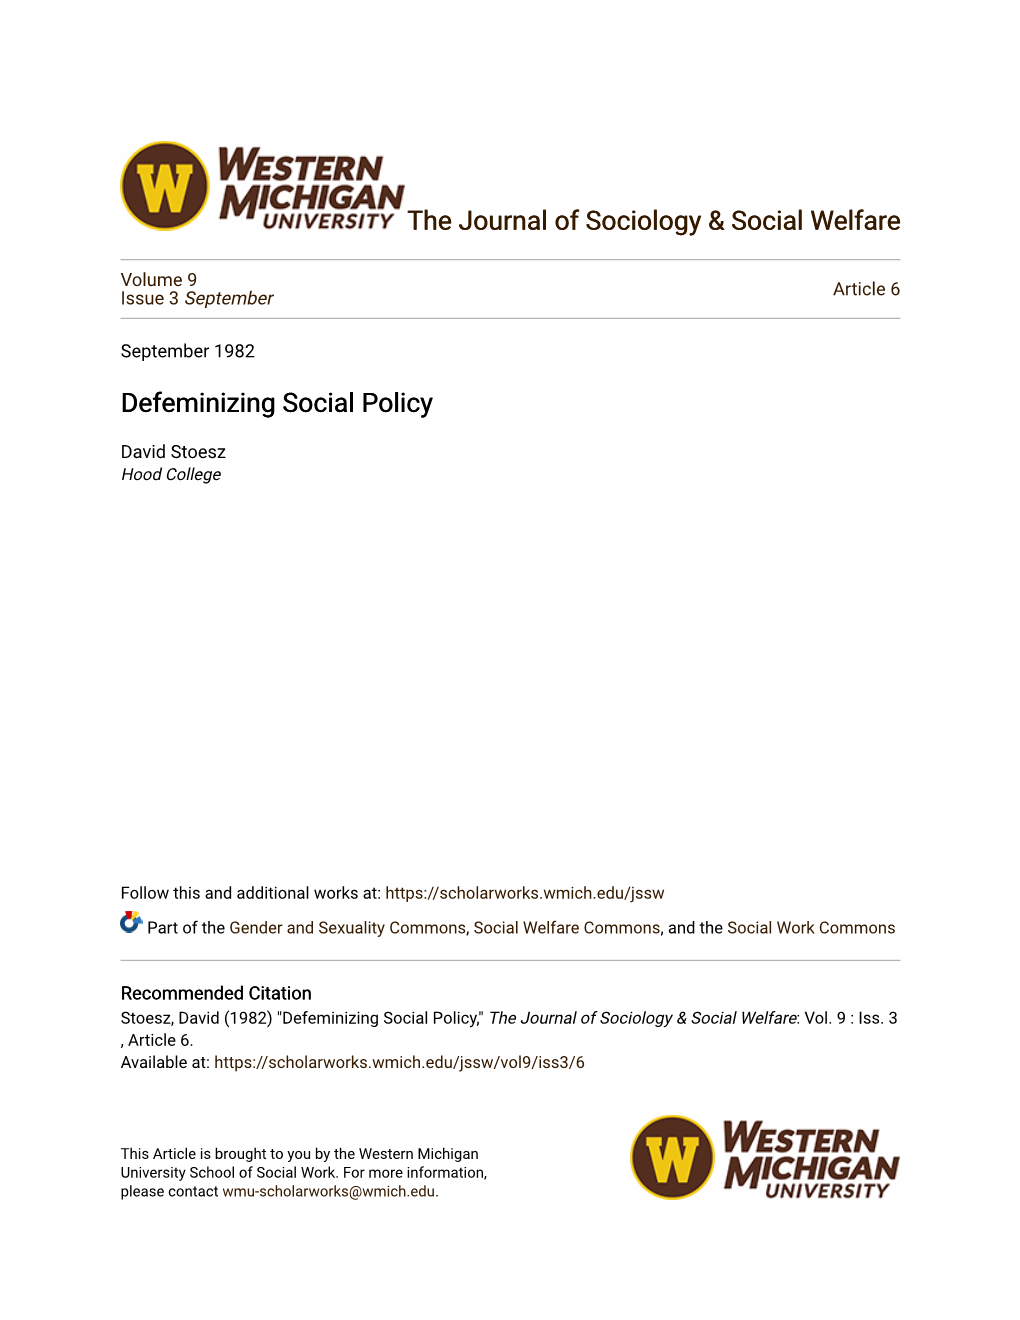 Defeminizing Social Policy